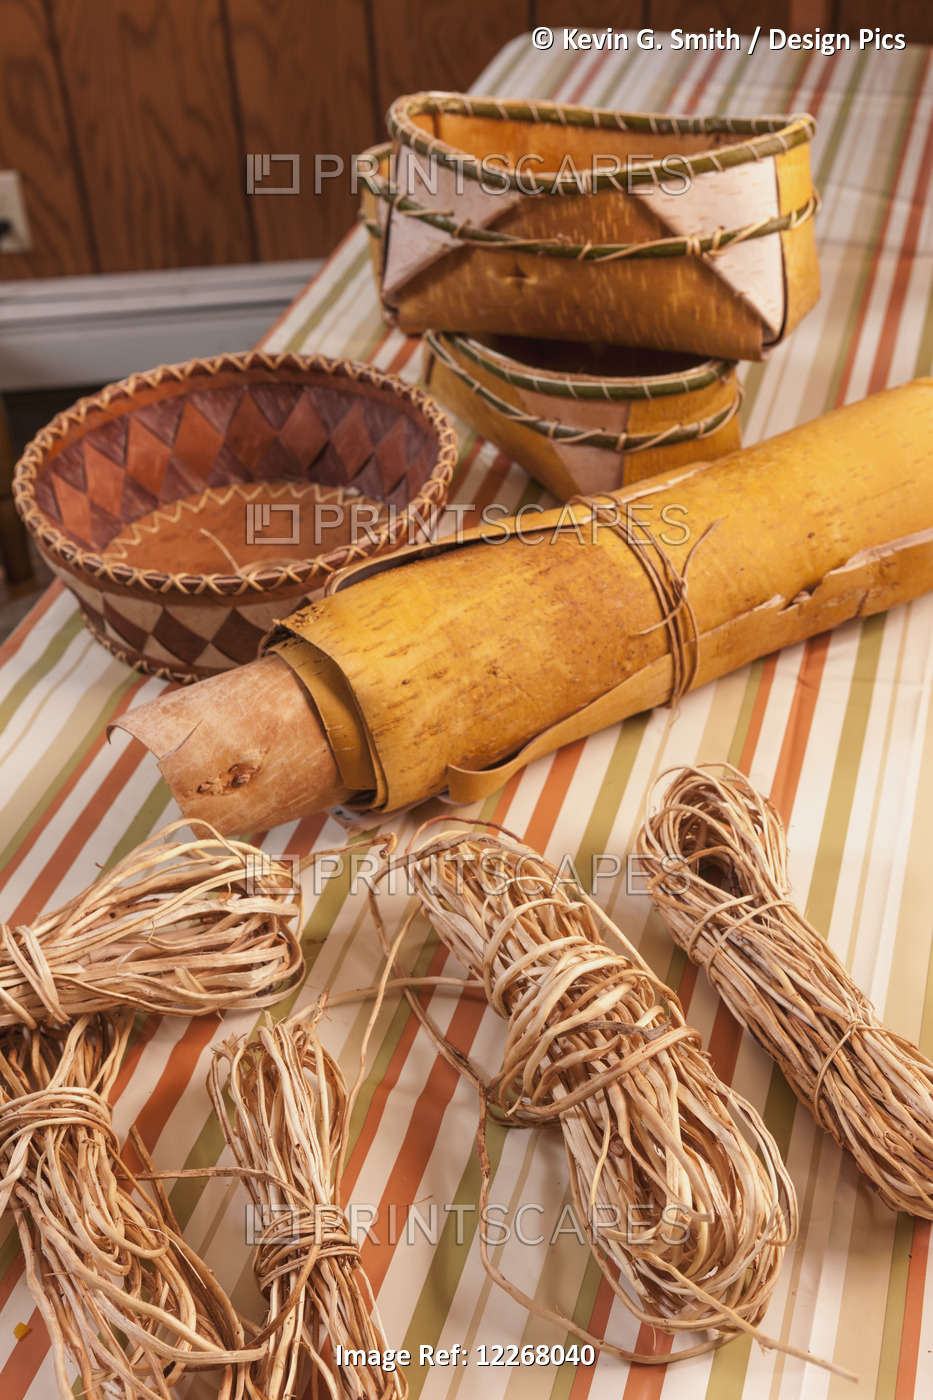 Supplies For Making Birch Bark Baskets Displayed On Table, Finished Bowls, ...